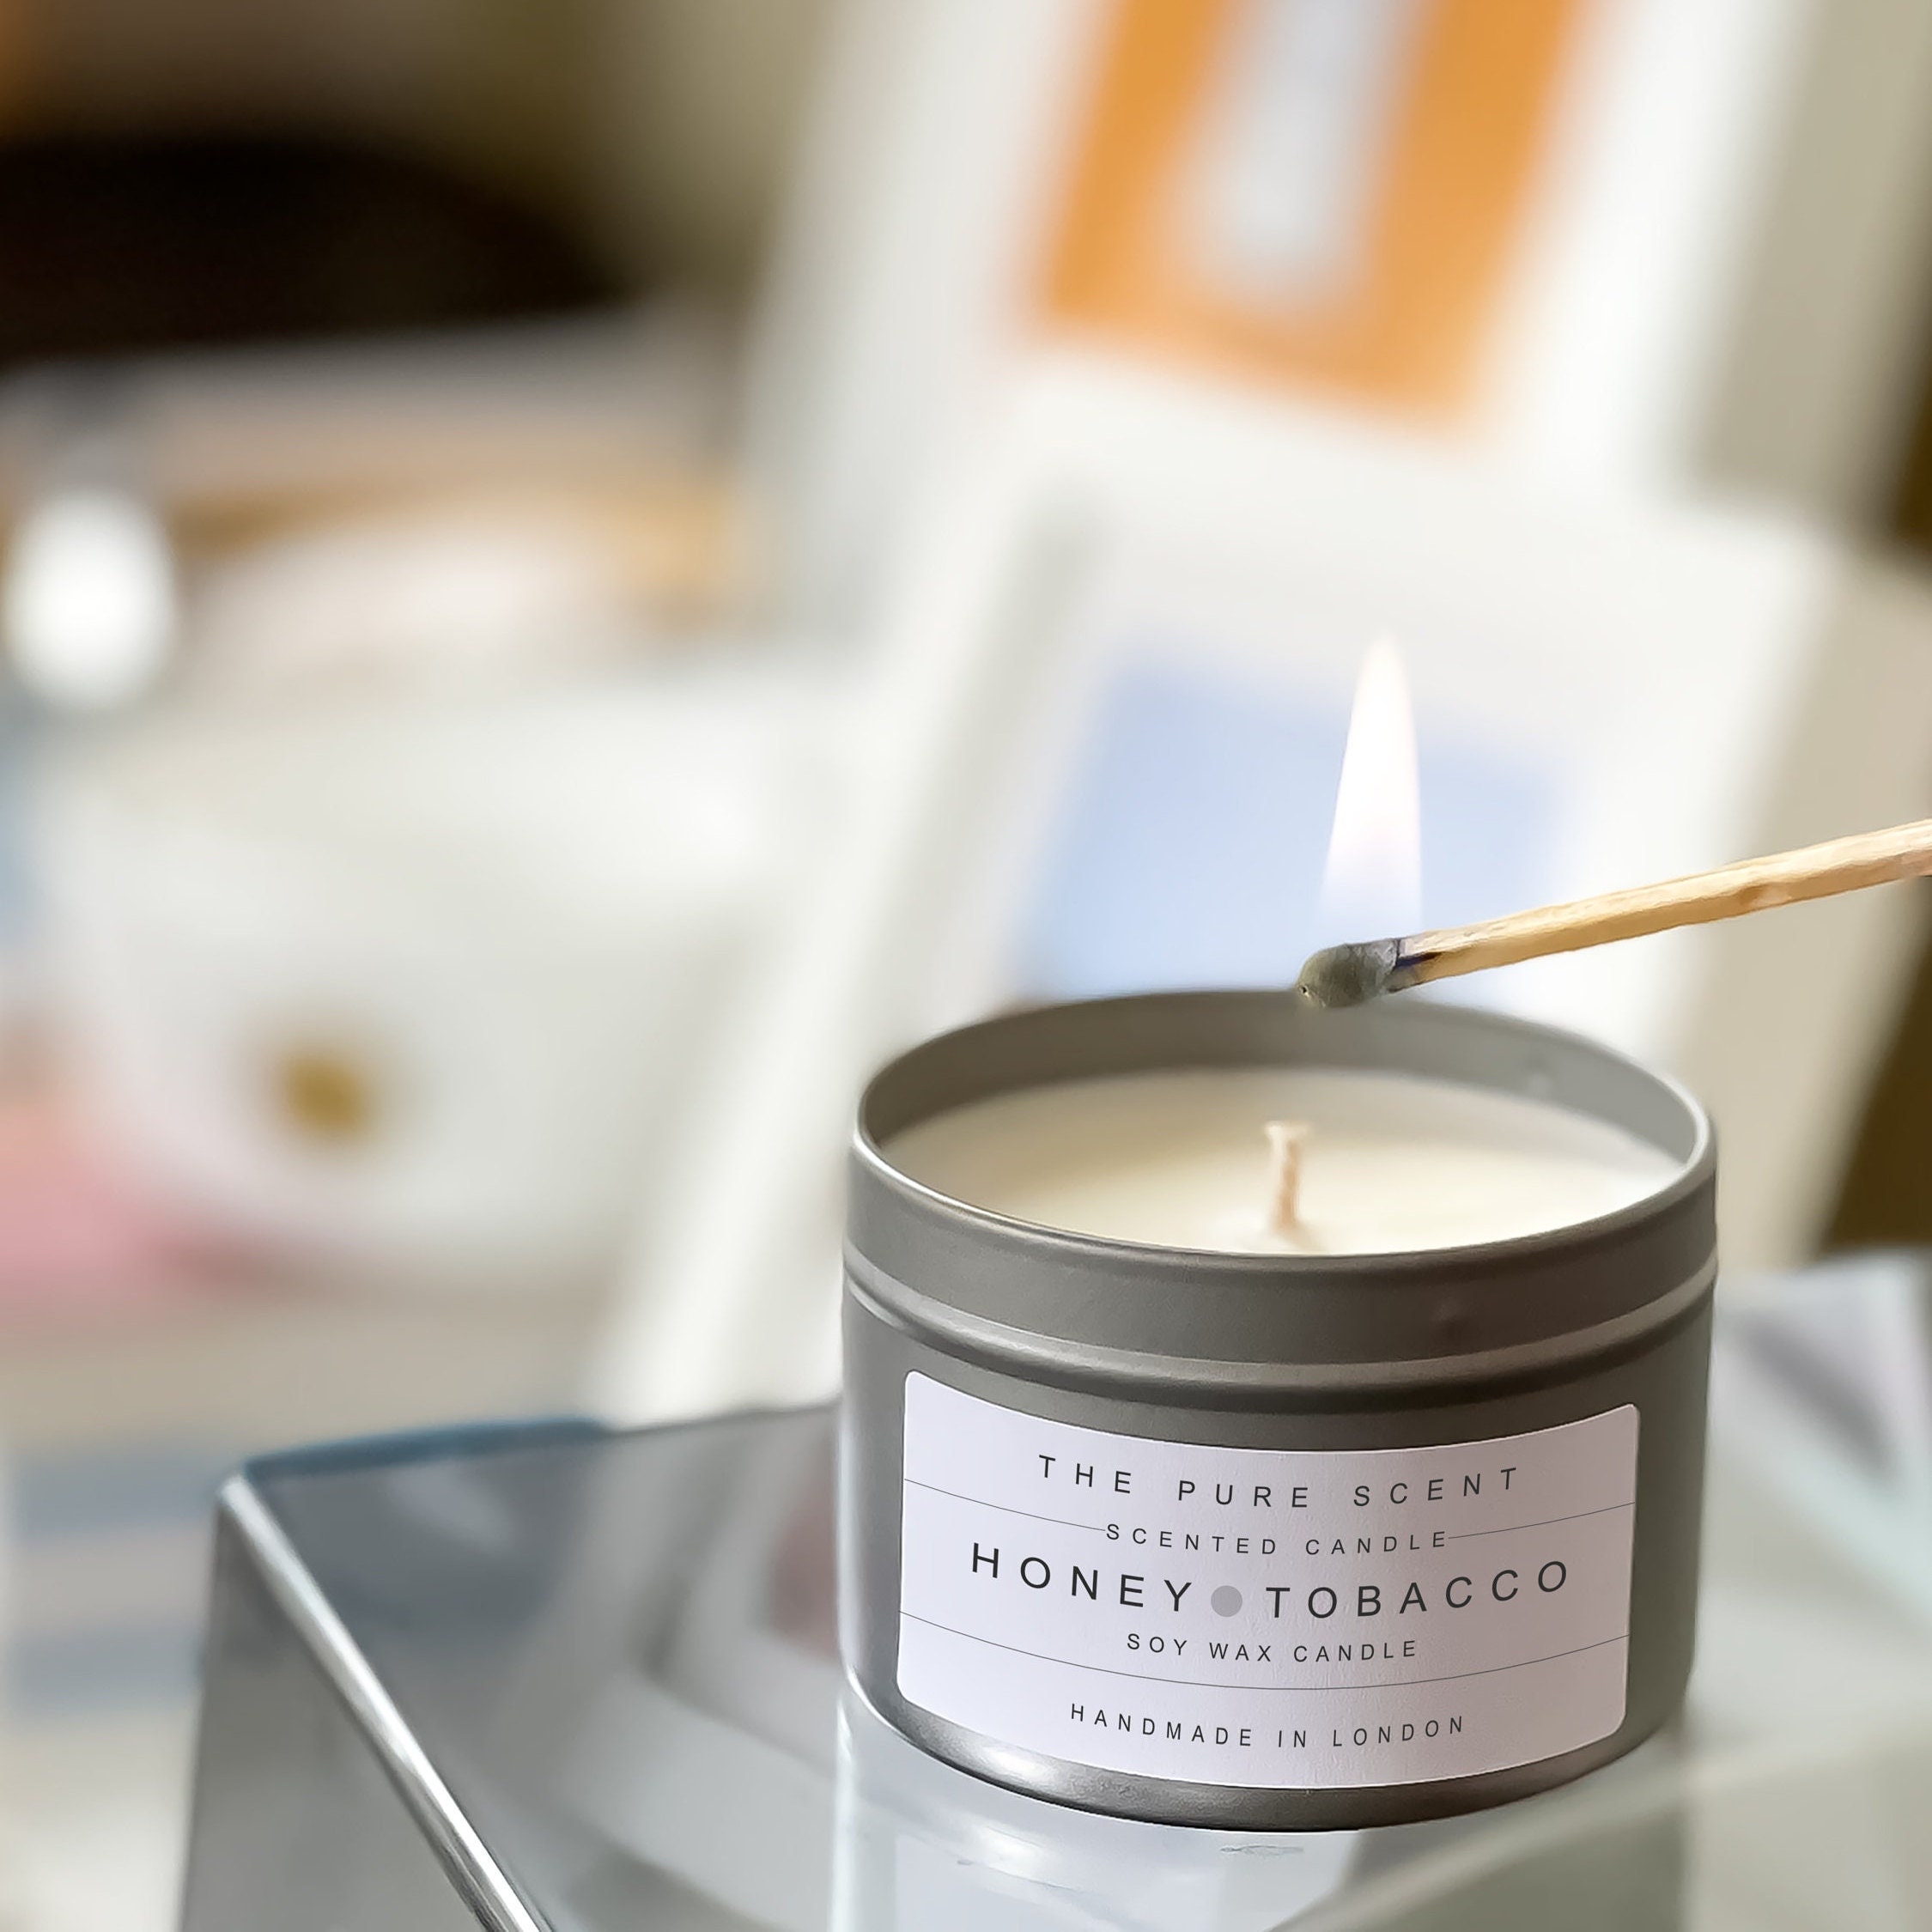 Honey & Tobacco Soy Candle in a Tin, Handmade in London, Homemade Candle,  Natural Candle, Scented Candle, Soy Wax Candle, Homemade Gift 